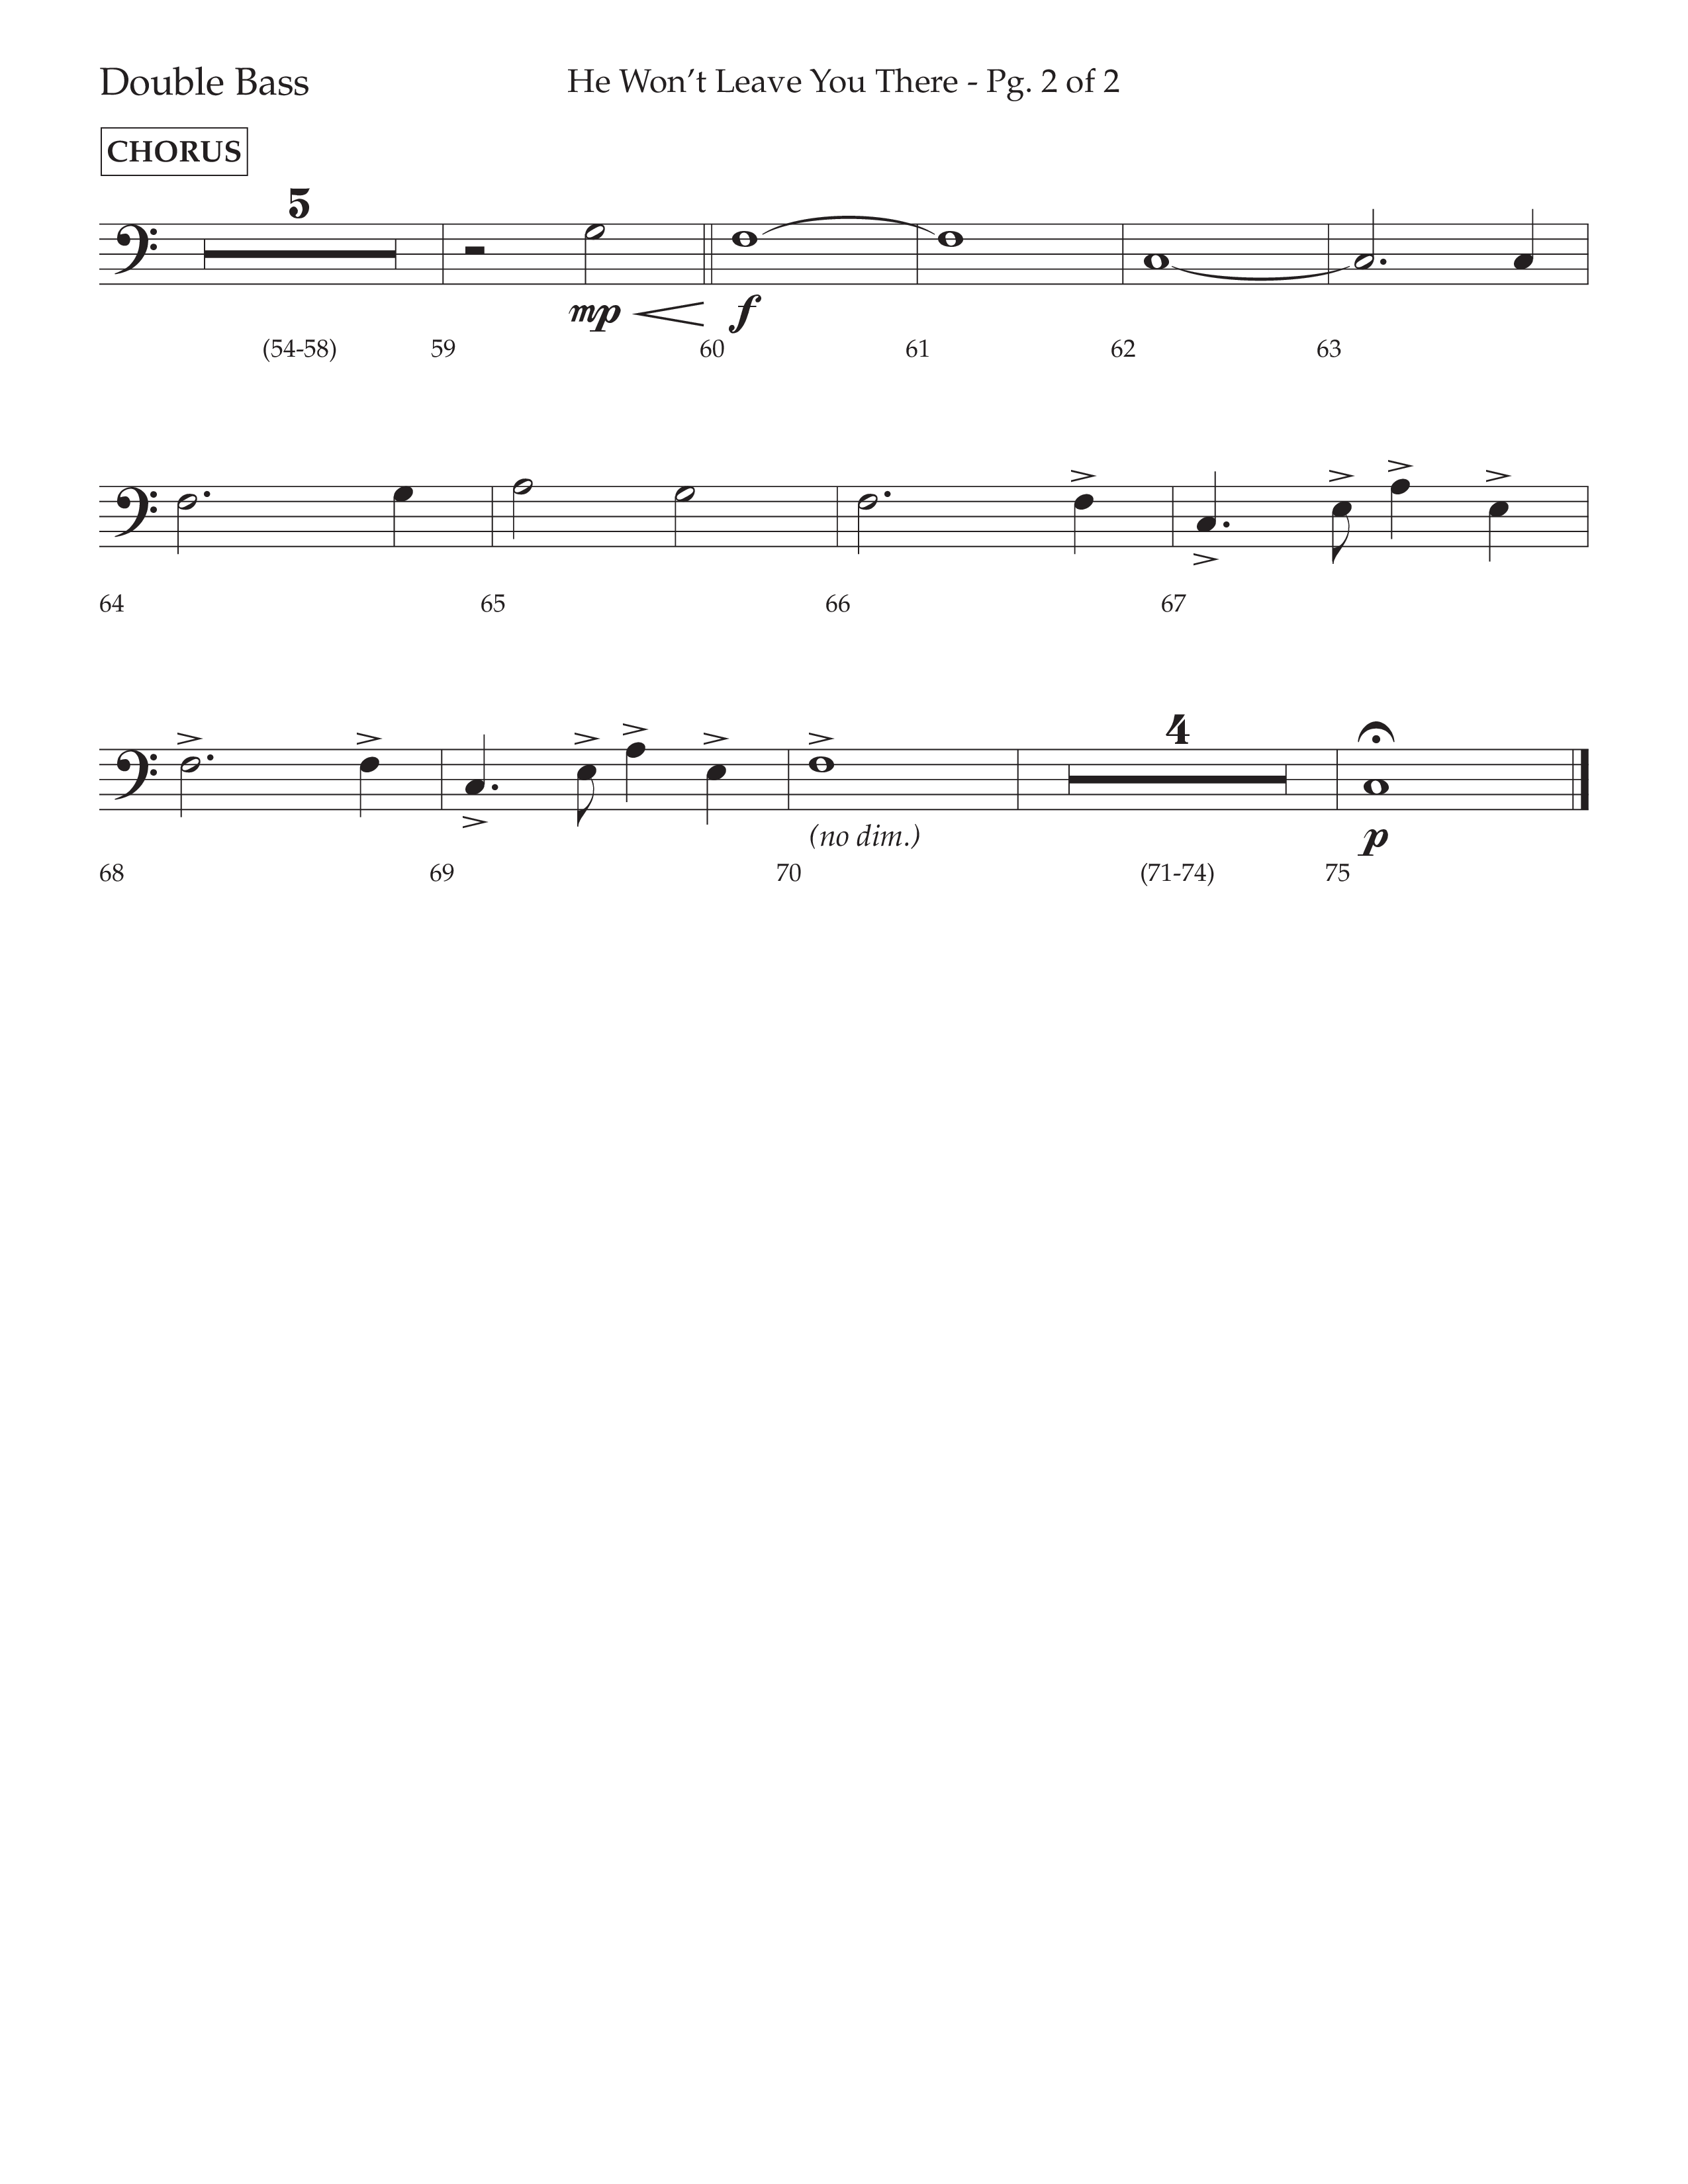 He Won't Leave You There (Choral Anthem SATB) Double Bass (Lifeway Choral / Arr. David Wise / Orch. David Shipps)